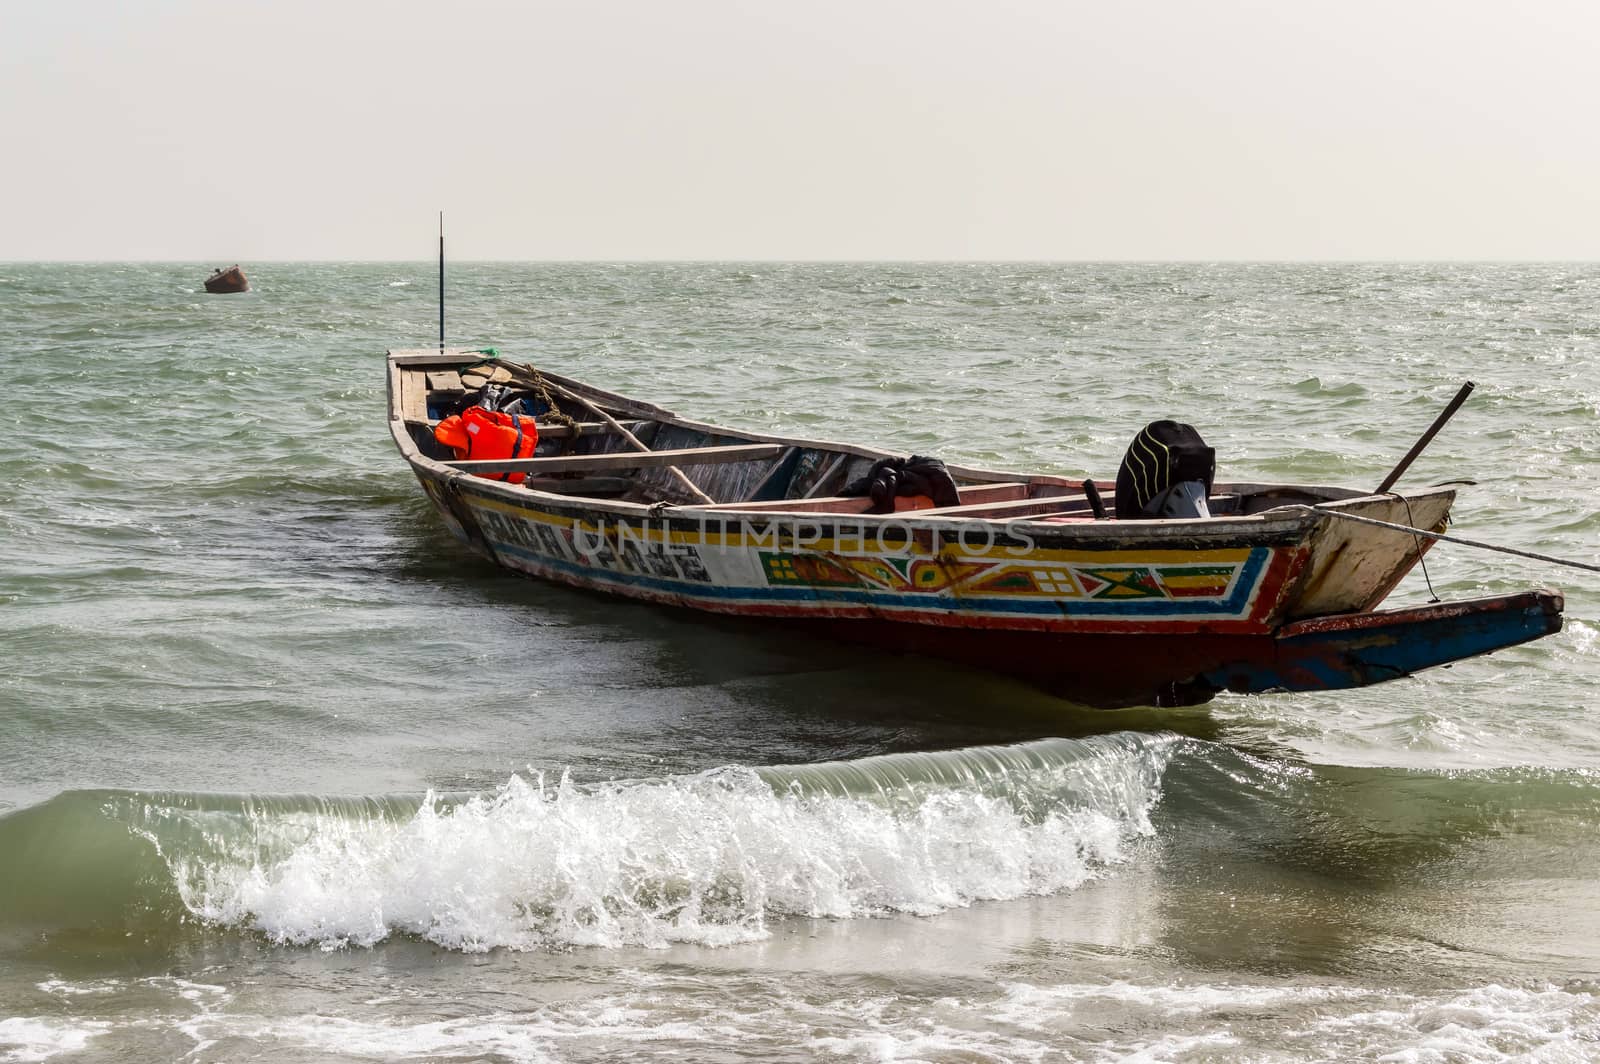 Colorful fishing boat in Banjul, capital of The Gambia, West Africa